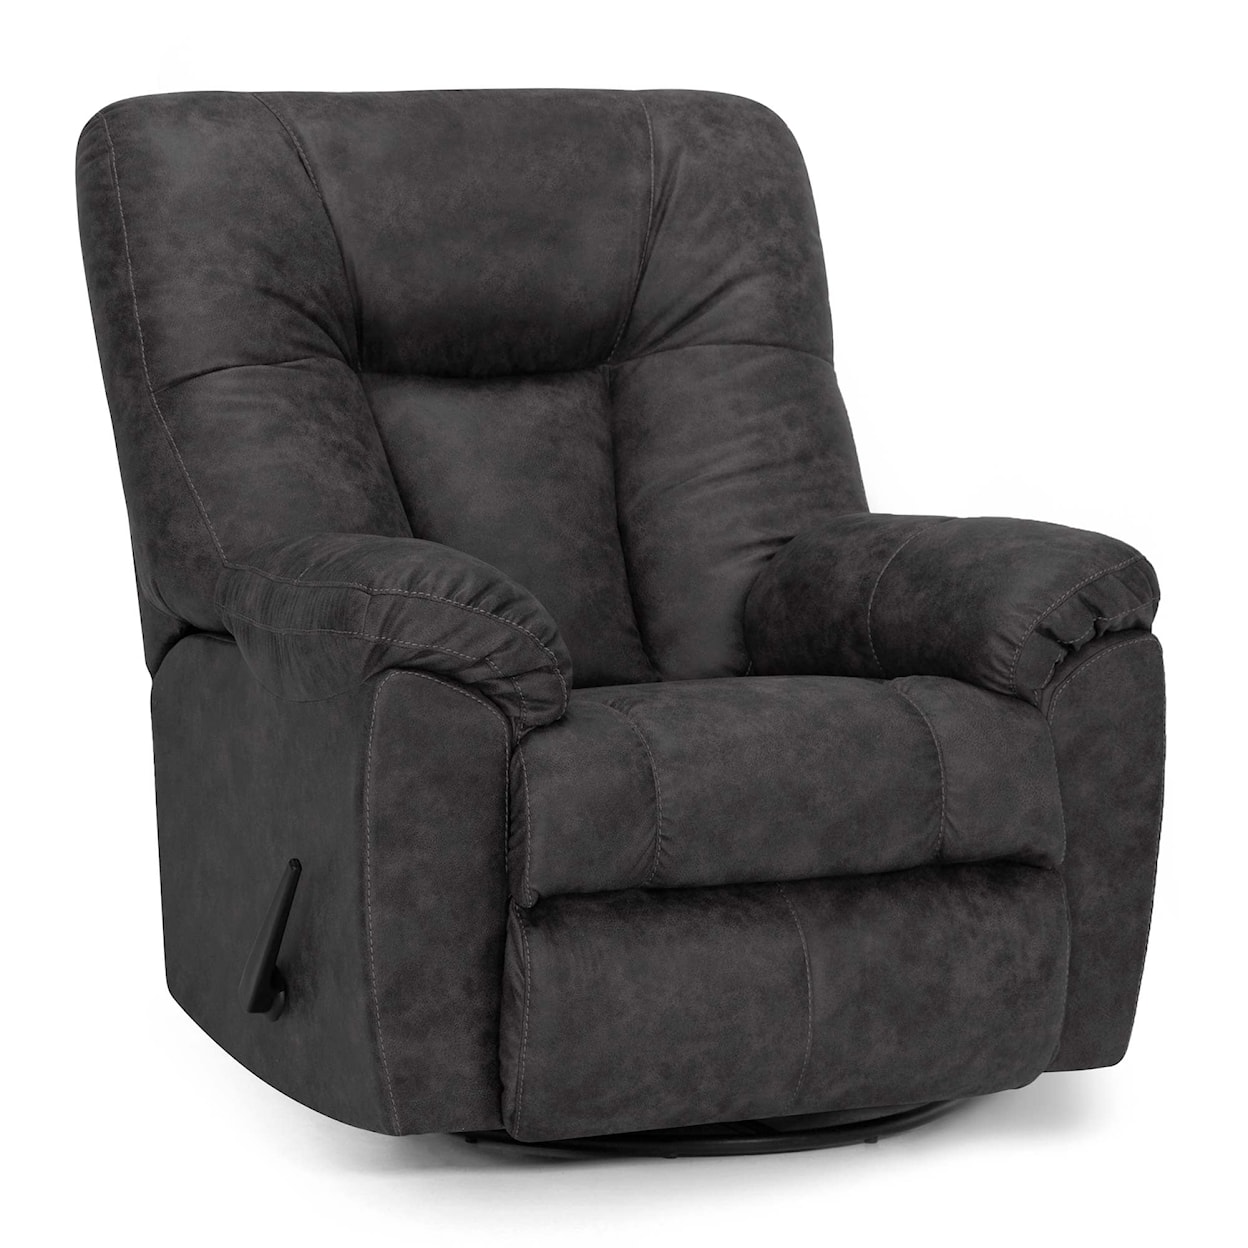 Franklin 4703 Connery Swivel Recliner